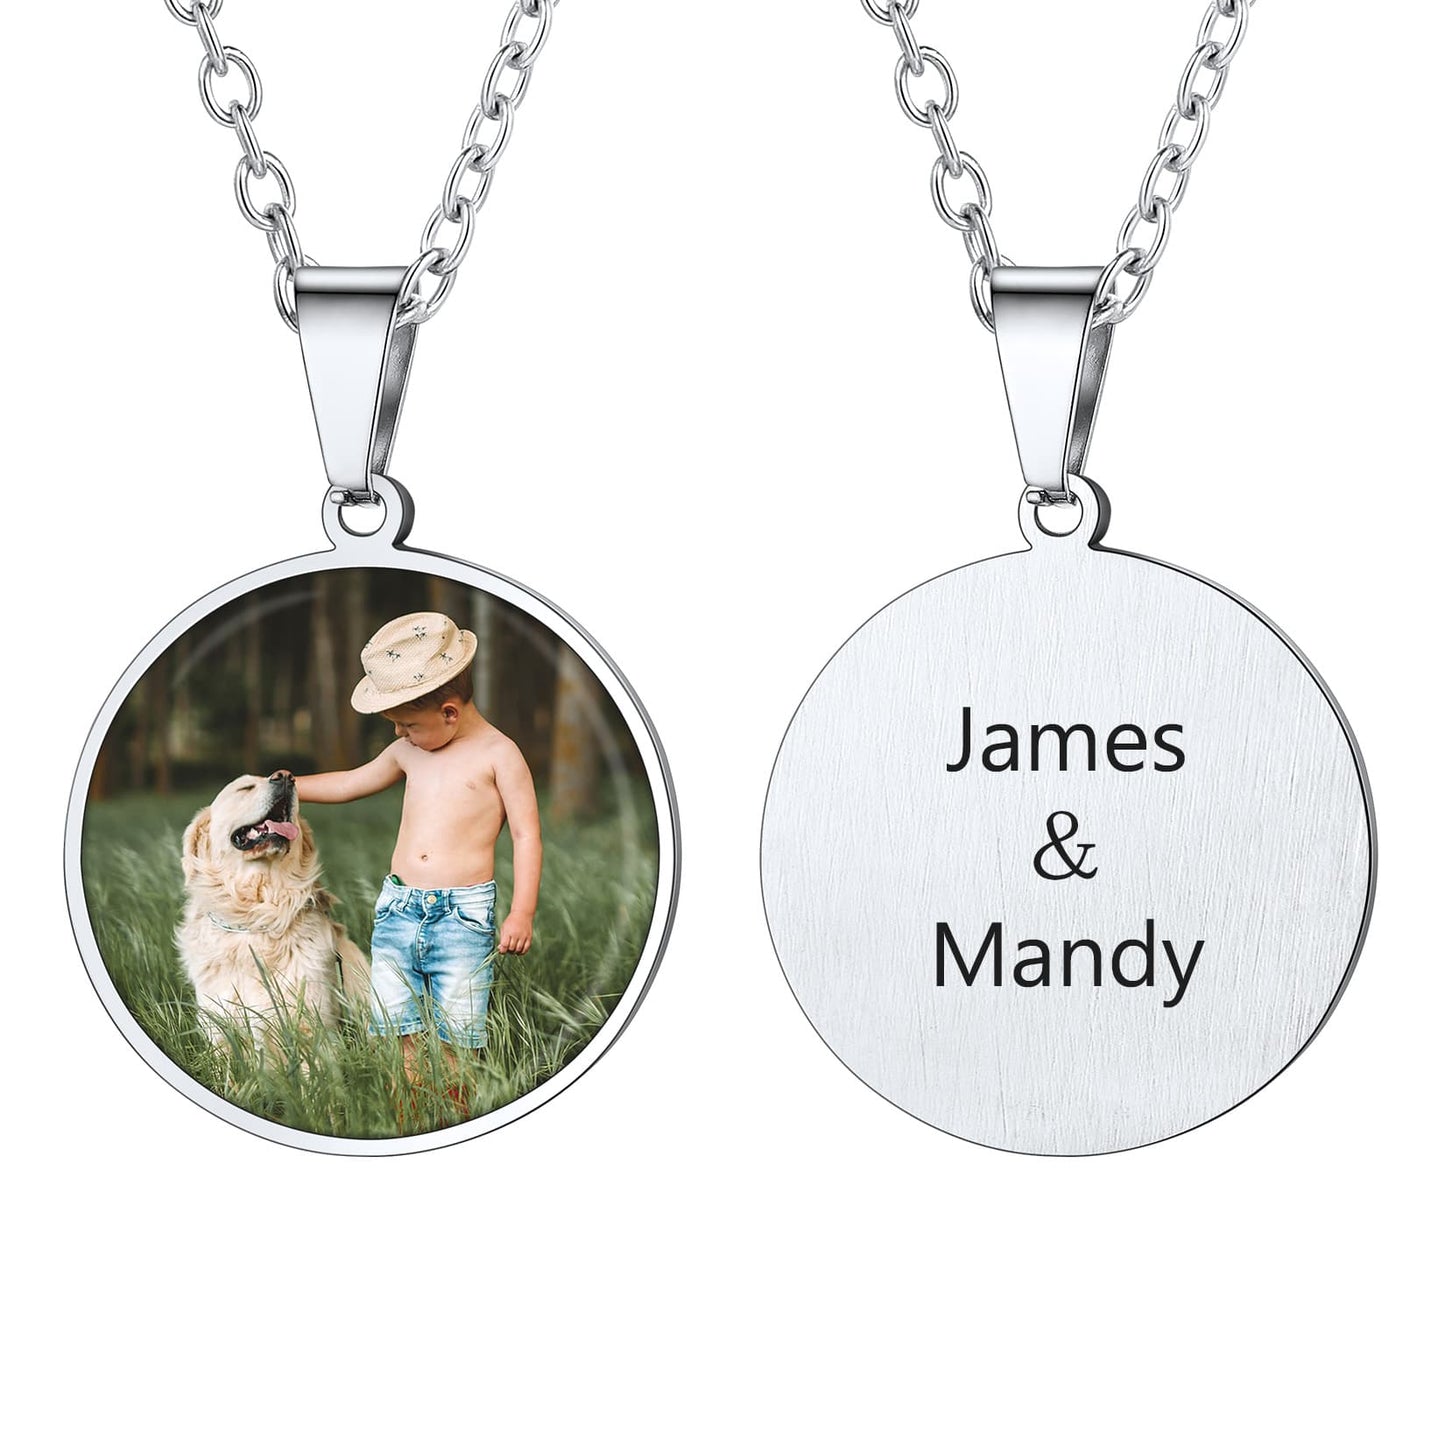 Birthstonesjewelry Personalized Round Picture Pendant Necklace Steel